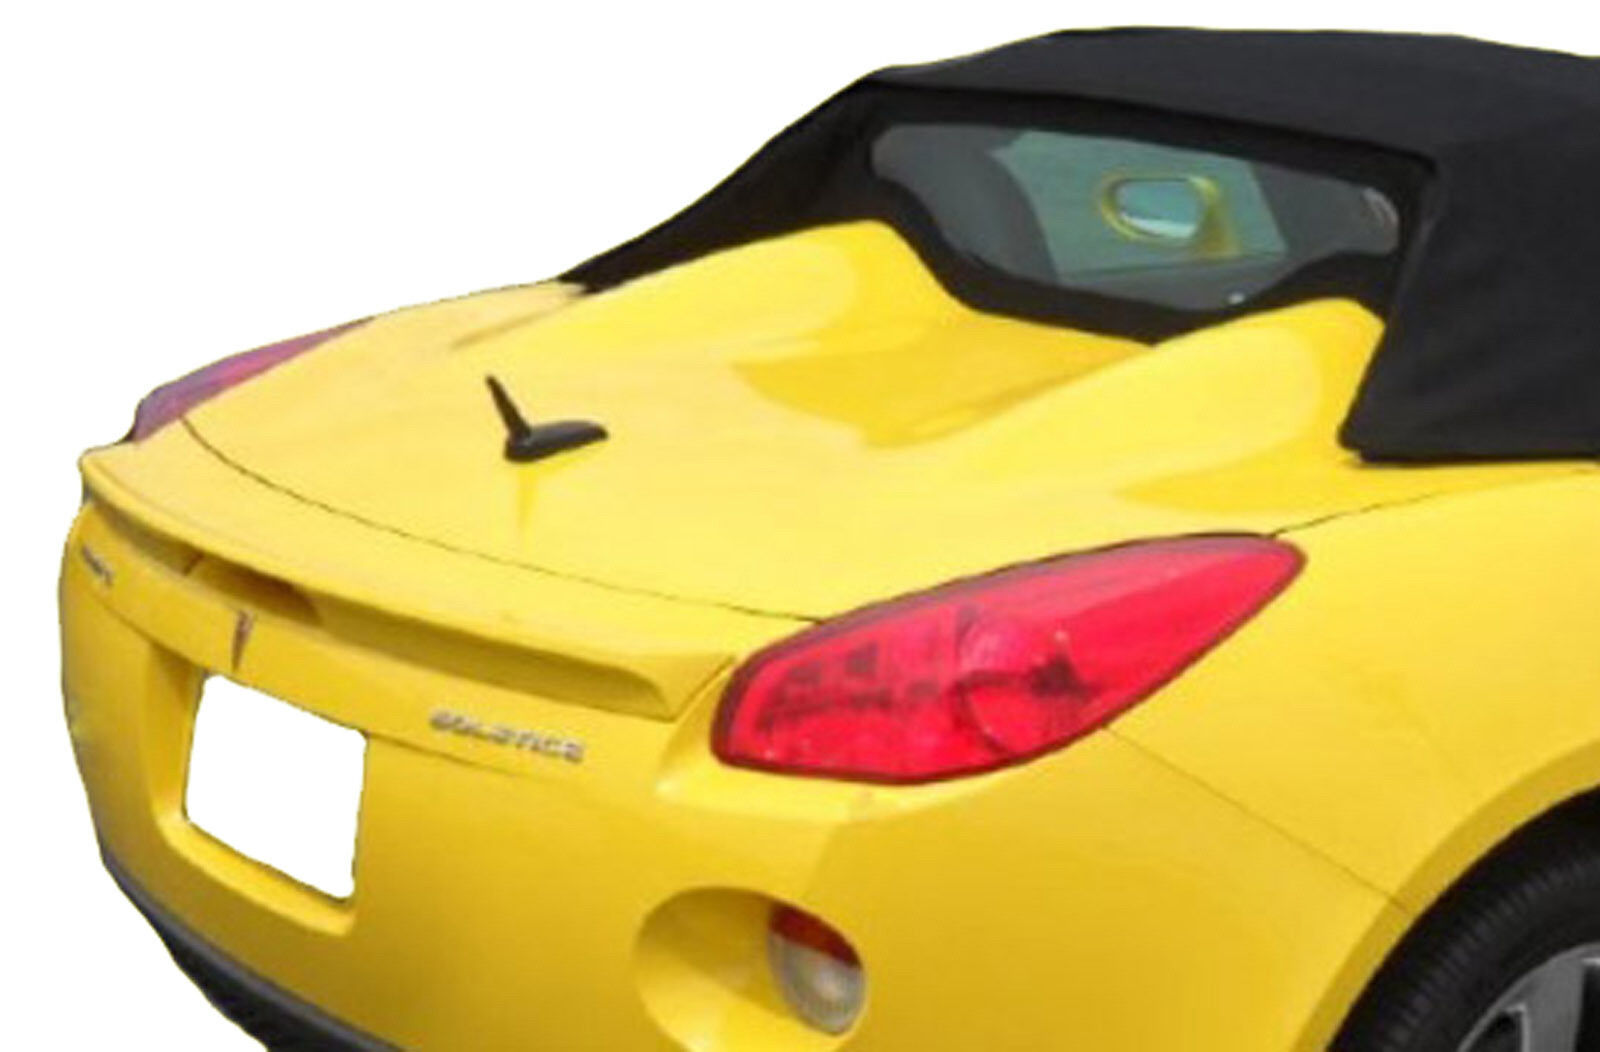 PAINTED LISTED COLORS FACTORY STYLE SPOILER FOR A PONTIAC SOLSTICE 2006-2010